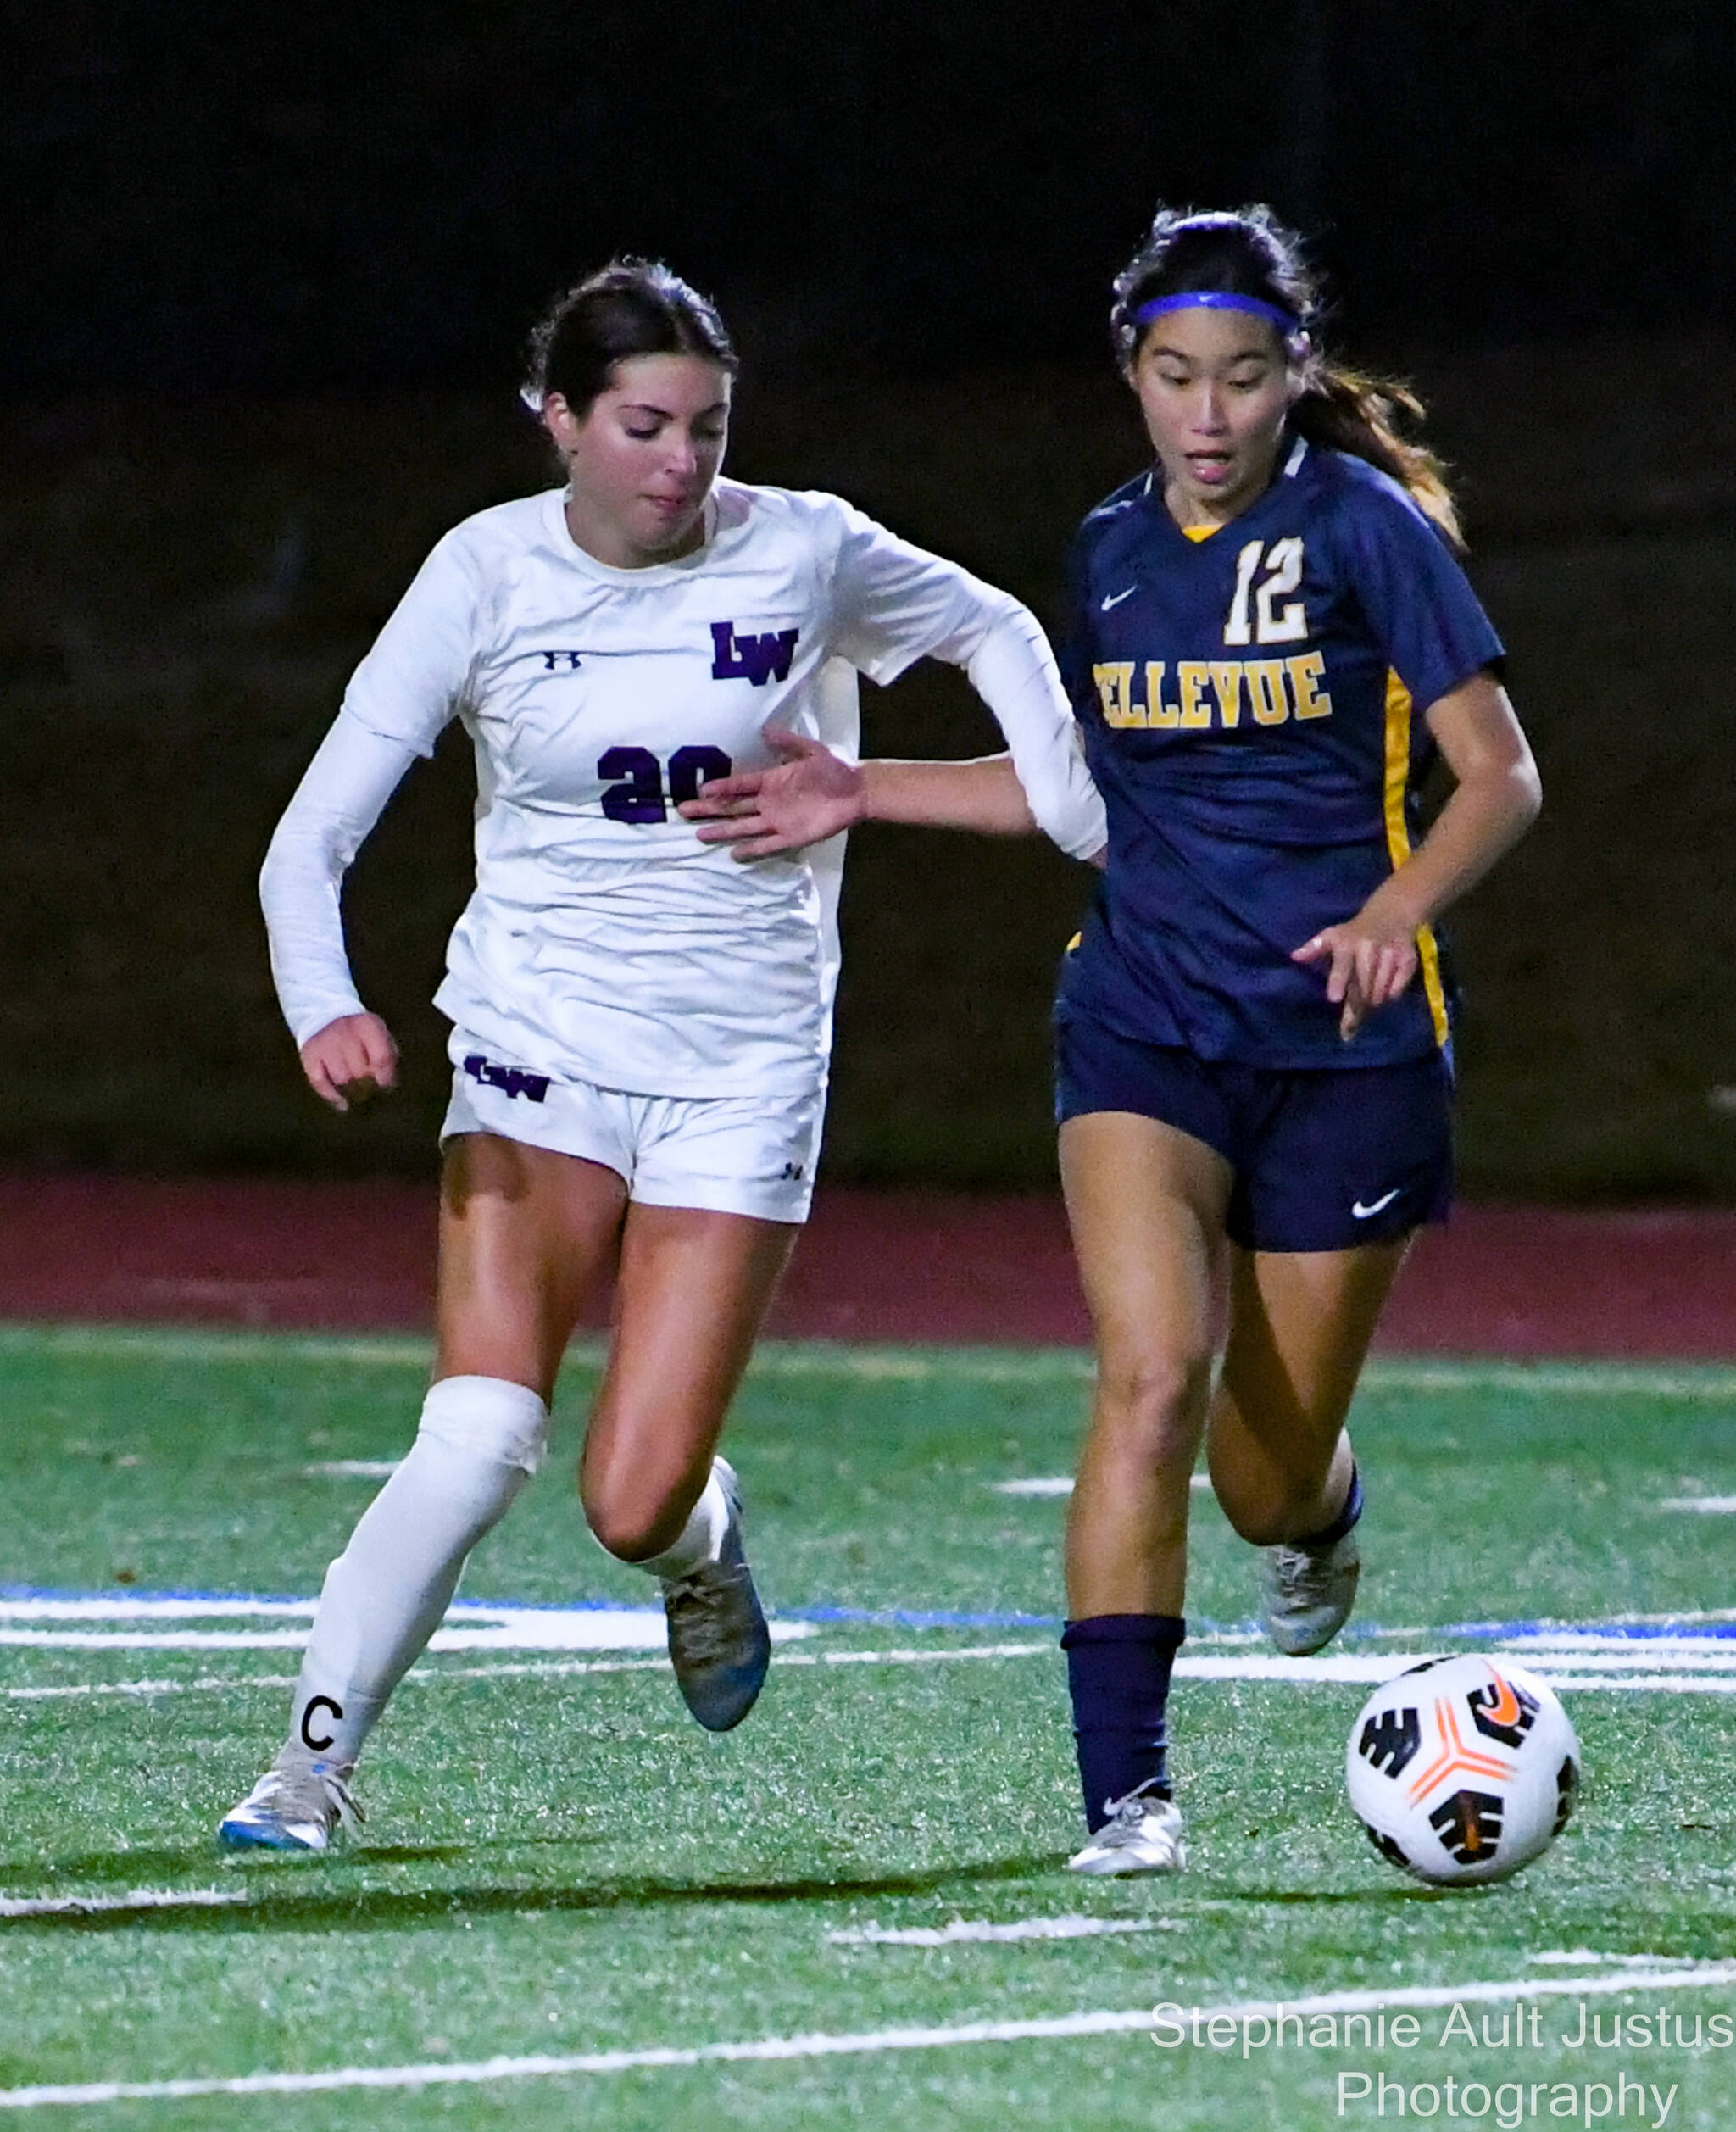 Bellevue senior Leah Uezato (#12) controls the ball while Lake Washington senior and captain, Ella Studer (#20) attempts to steal it. Courtesy of Stephanie Ault Justus.